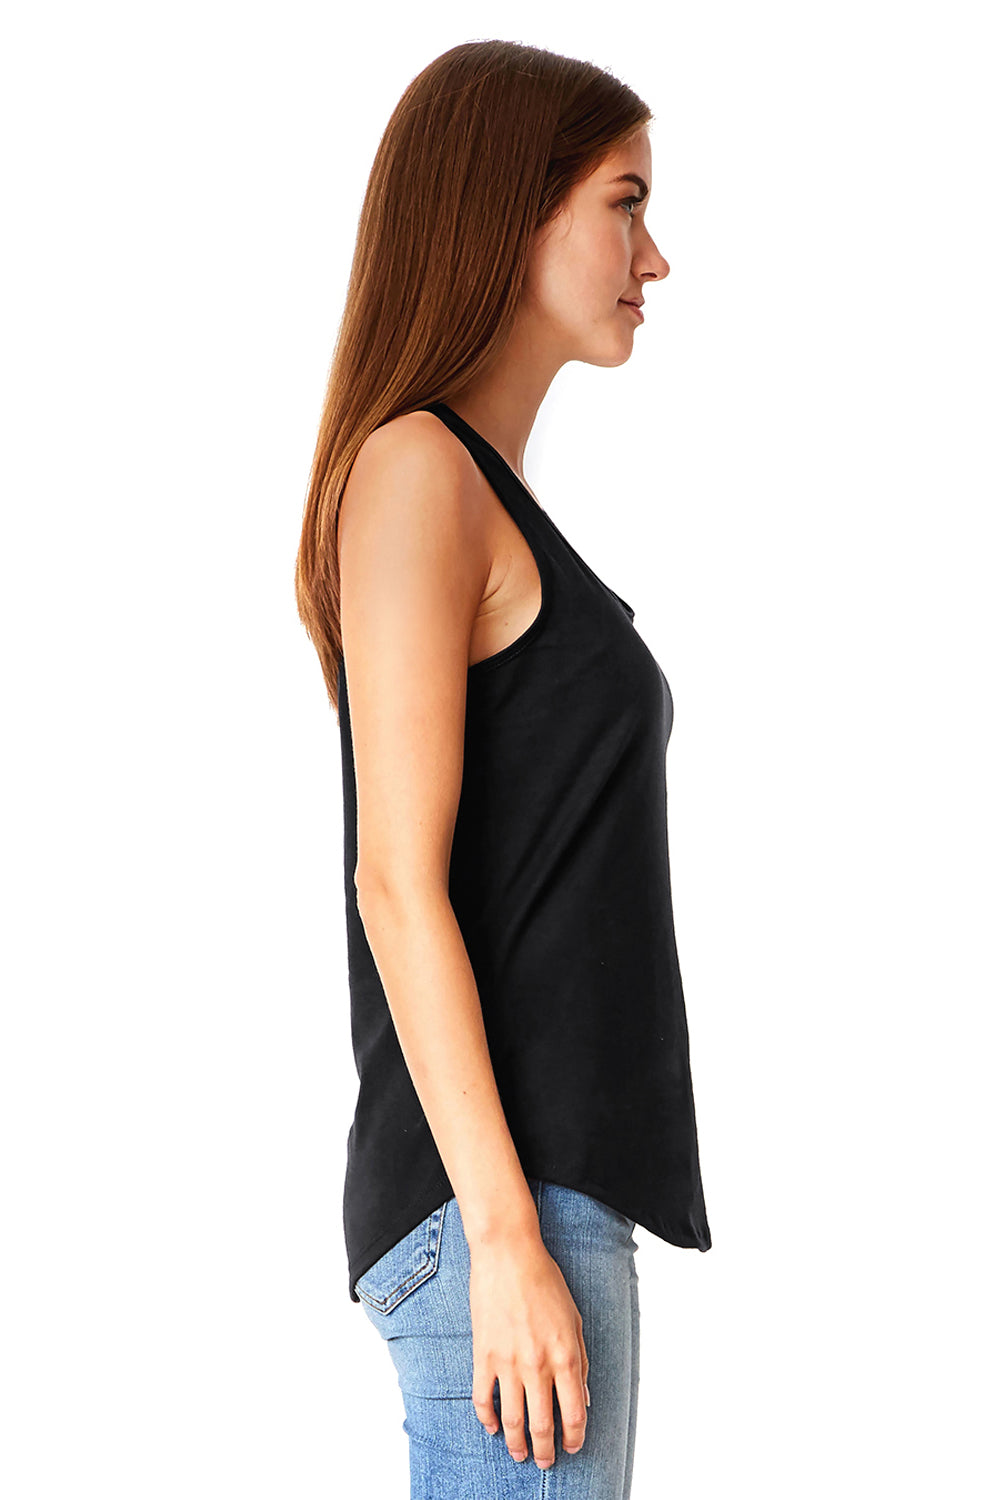 Next Level 6338 Womens Gathered Tank Top Black Side